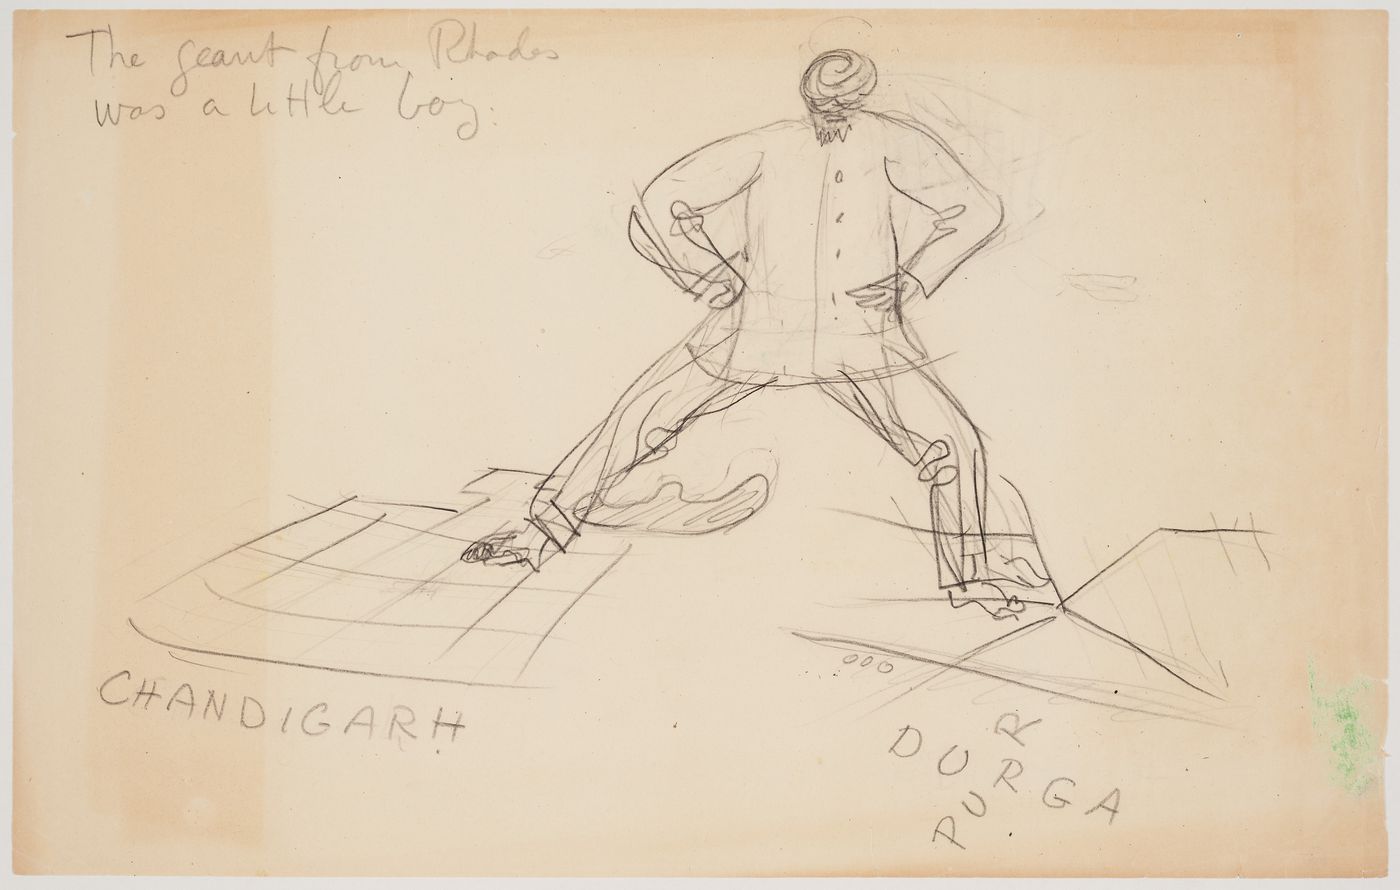 Drawing depicting a colossus with a foot in Chandigarh and a foot in Durgapur